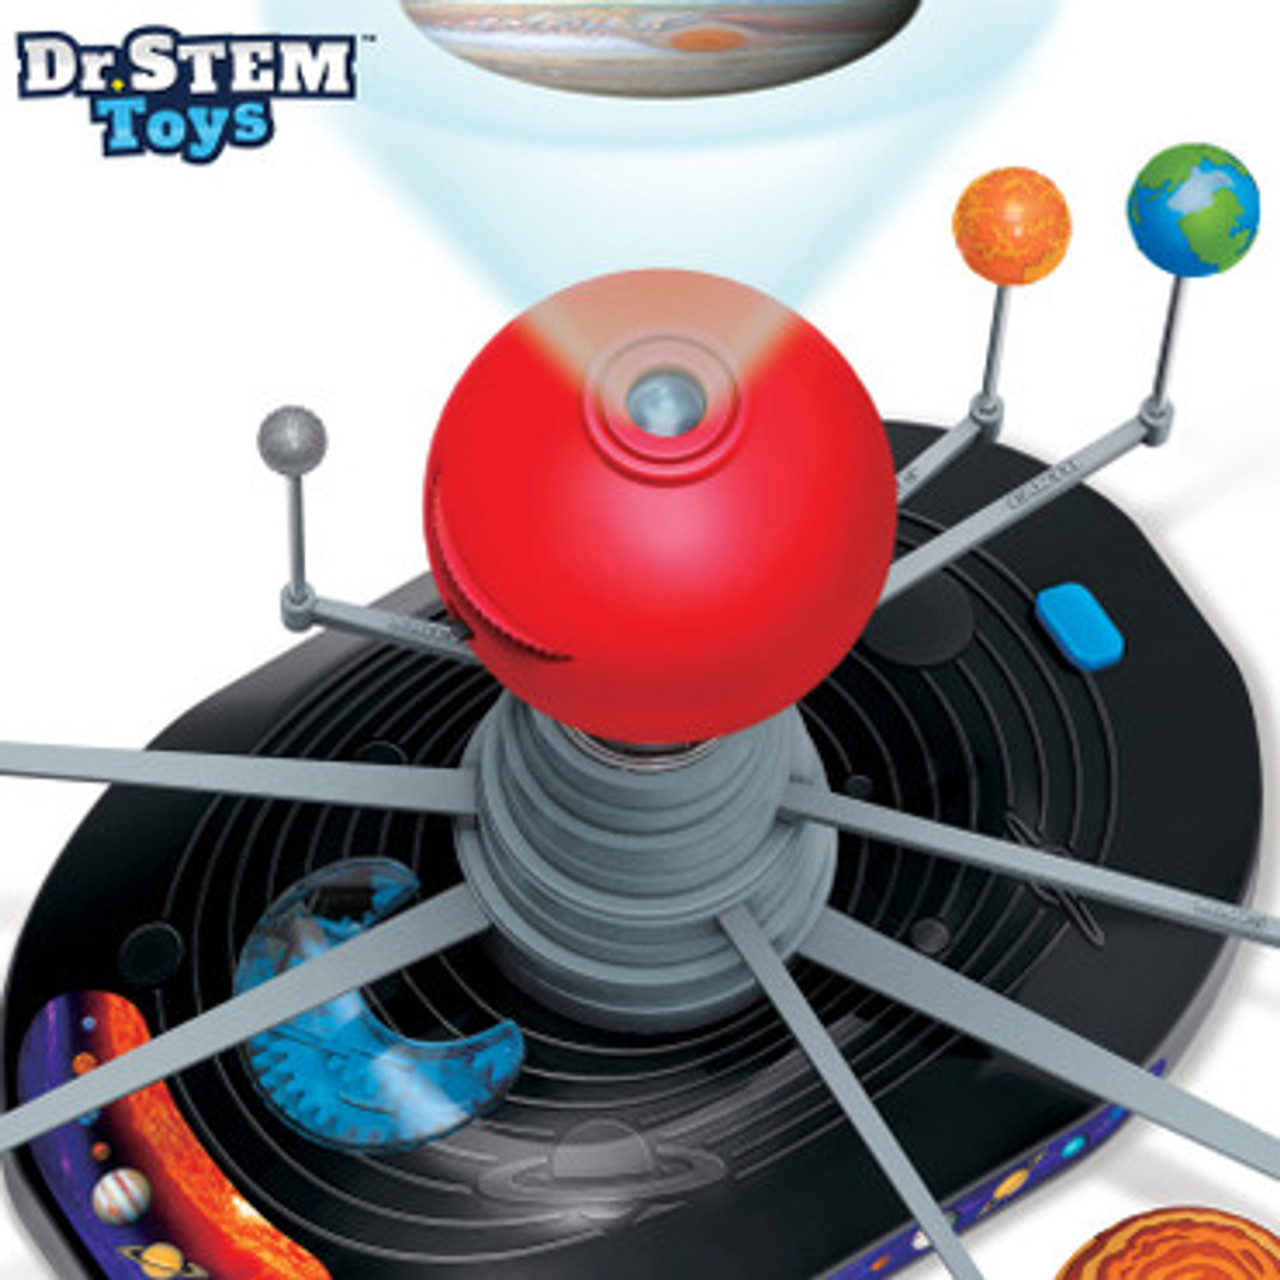 Solar System Planetarium Projector for Kids Glow in The Dark Solar System  Model Kit with 8 Planets Model Astronomy STEM Planets Space Toys  Educational Planet Model Stem Toys 